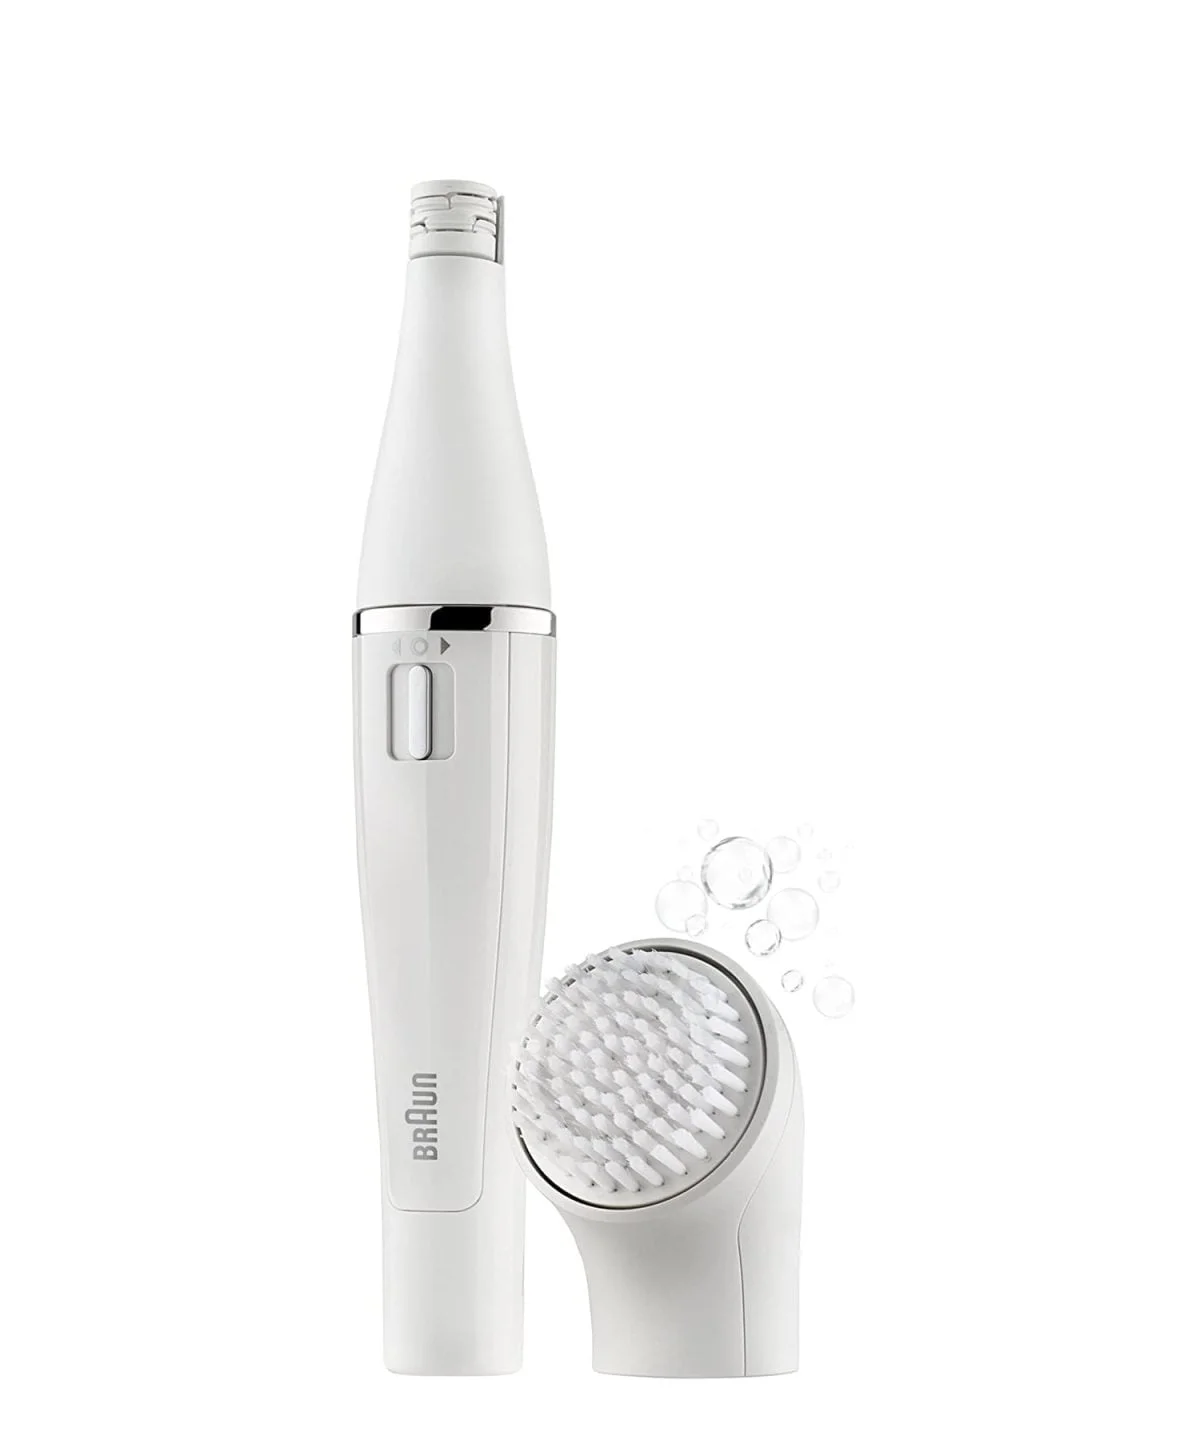 71Lnlr 6Uql. Ac Sl1500 Braun &Lt;H1&Gt;Braun Face 810 Facial Epilator &Amp; Facial Cleansing Brush With Micro-Oscillations&Lt;/H1&Gt; &Lt;Ul Class=&Quot;A-Unordered-List A-Vertical A-Spacing-Mini&Quot;&Gt; &Lt;Li&Gt;&Lt;Span Class=&Quot;A-List-Item&Quot;&Gt; World’s First Facial Epilator And Cleansing Brush System &Lt;/Span&Gt;&Lt;/Li&Gt; &Lt;Li&Gt;&Lt;Span Class=&Quot;A-List-Item&Quot;&Gt; Facial Epilator: Sleek And Compact Design For Precise Epilation. 10 Micro-Openings Catch Even The Finest Hairs (0.02Mm) &Lt;/Span&Gt;&Lt;/Li&Gt; &Lt;Li&Gt;&Lt;Span Class=&Quot;A-List-Item&Quot;&Gt; Facial Cleansing Brush: Gently Cleanse Skin Pore-Deep With Micro-Oscillations. Tested With Dermatologists For Daily Use On Sensitive Skin &Lt;/Span&Gt;&Lt;/Li&Gt; &Lt;Li&Gt;&Lt;Span Class=&Quot;A-List-Item&Quot;&Gt; Gentle Epilation For Smooth Skin Up To 4 Weeks &Lt;/Span&Gt;&Lt;/Li&Gt; &Lt;Li&Gt;&Lt;Span Class=&Quot;A-List-Item&Quot;&Gt; Ergonomic Design, Comfortable Grip &Lt;/Span&Gt;&Lt;/Li&Gt; &Lt;/Ul&Gt; Braun Face 810 Facial Epilator Braun Face 810 Facial Epilator And Facial Cleansing Brush With Micro-Oscillations